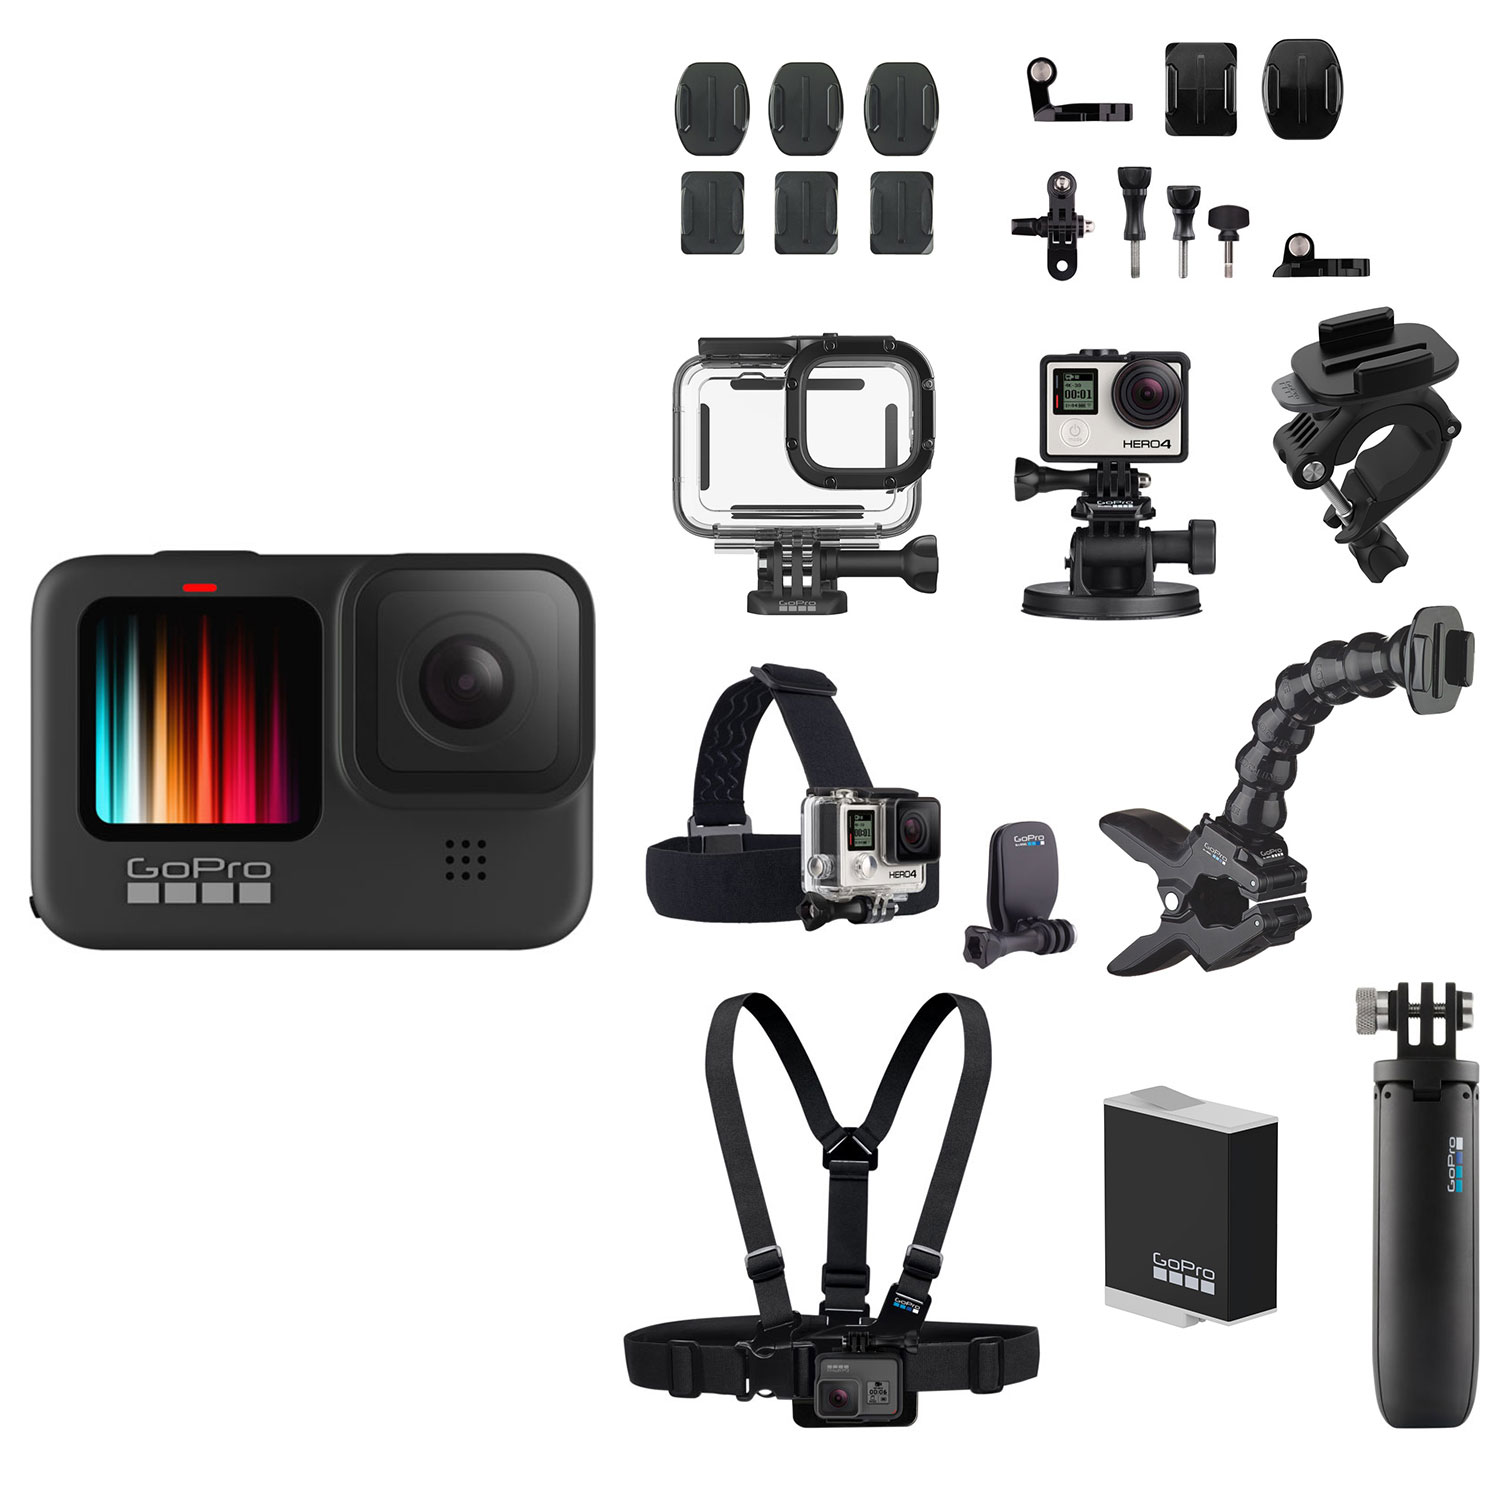 GoPro HERO9 Black Waterproof 5K with Chest Mount, Head Strap, Housing Case, Extra Battery & Accessories